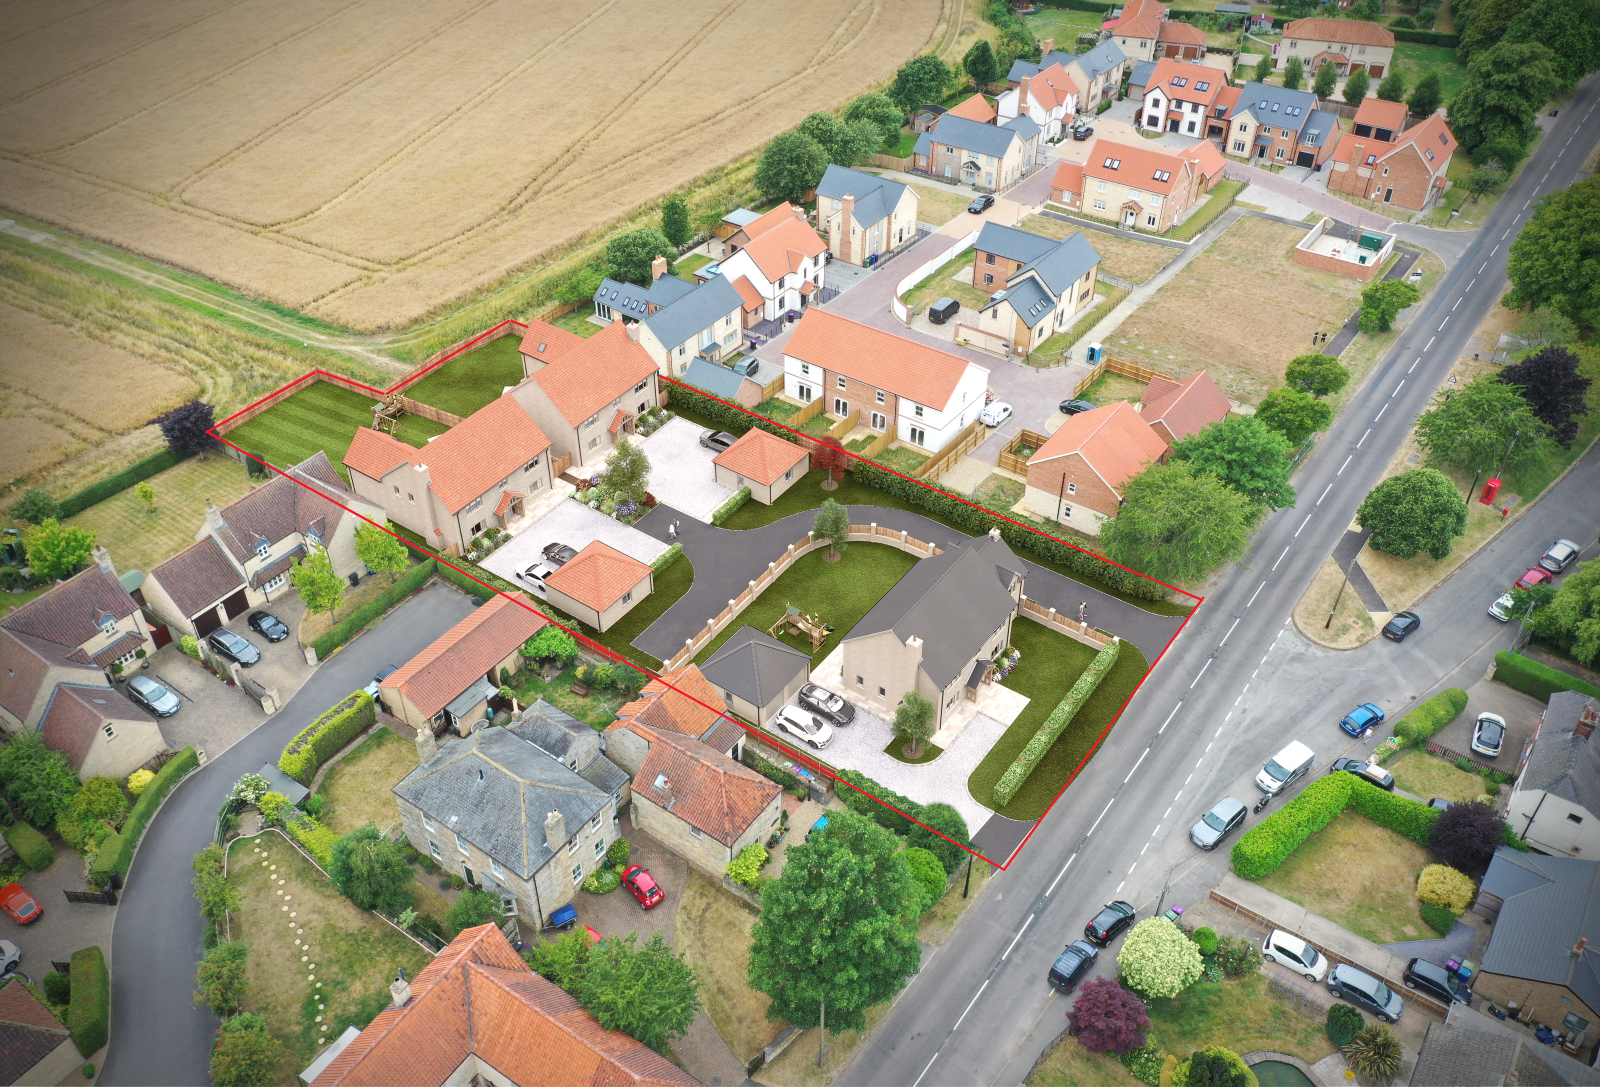 The proposed development site (within the red line) is located in between the newbuild estate of 617 Court and Manor Farm Cottage on the High Street, directly opposite the eastern entrance to the layby.